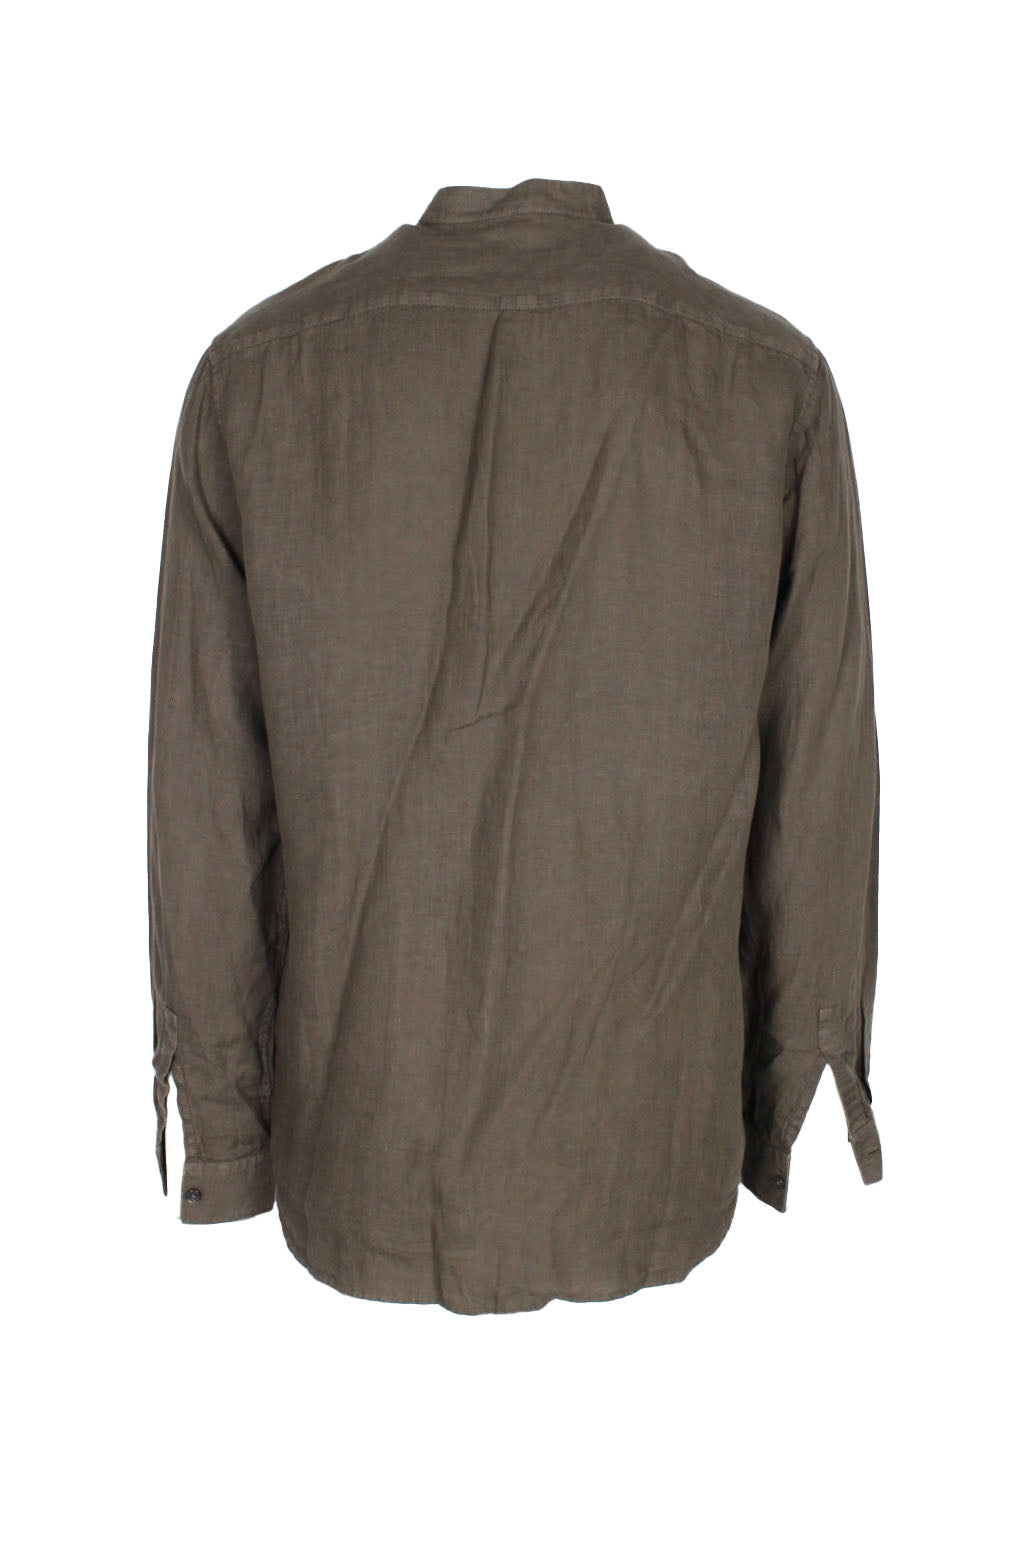 rear view with buttons at cuffs of sleeves of shirt.